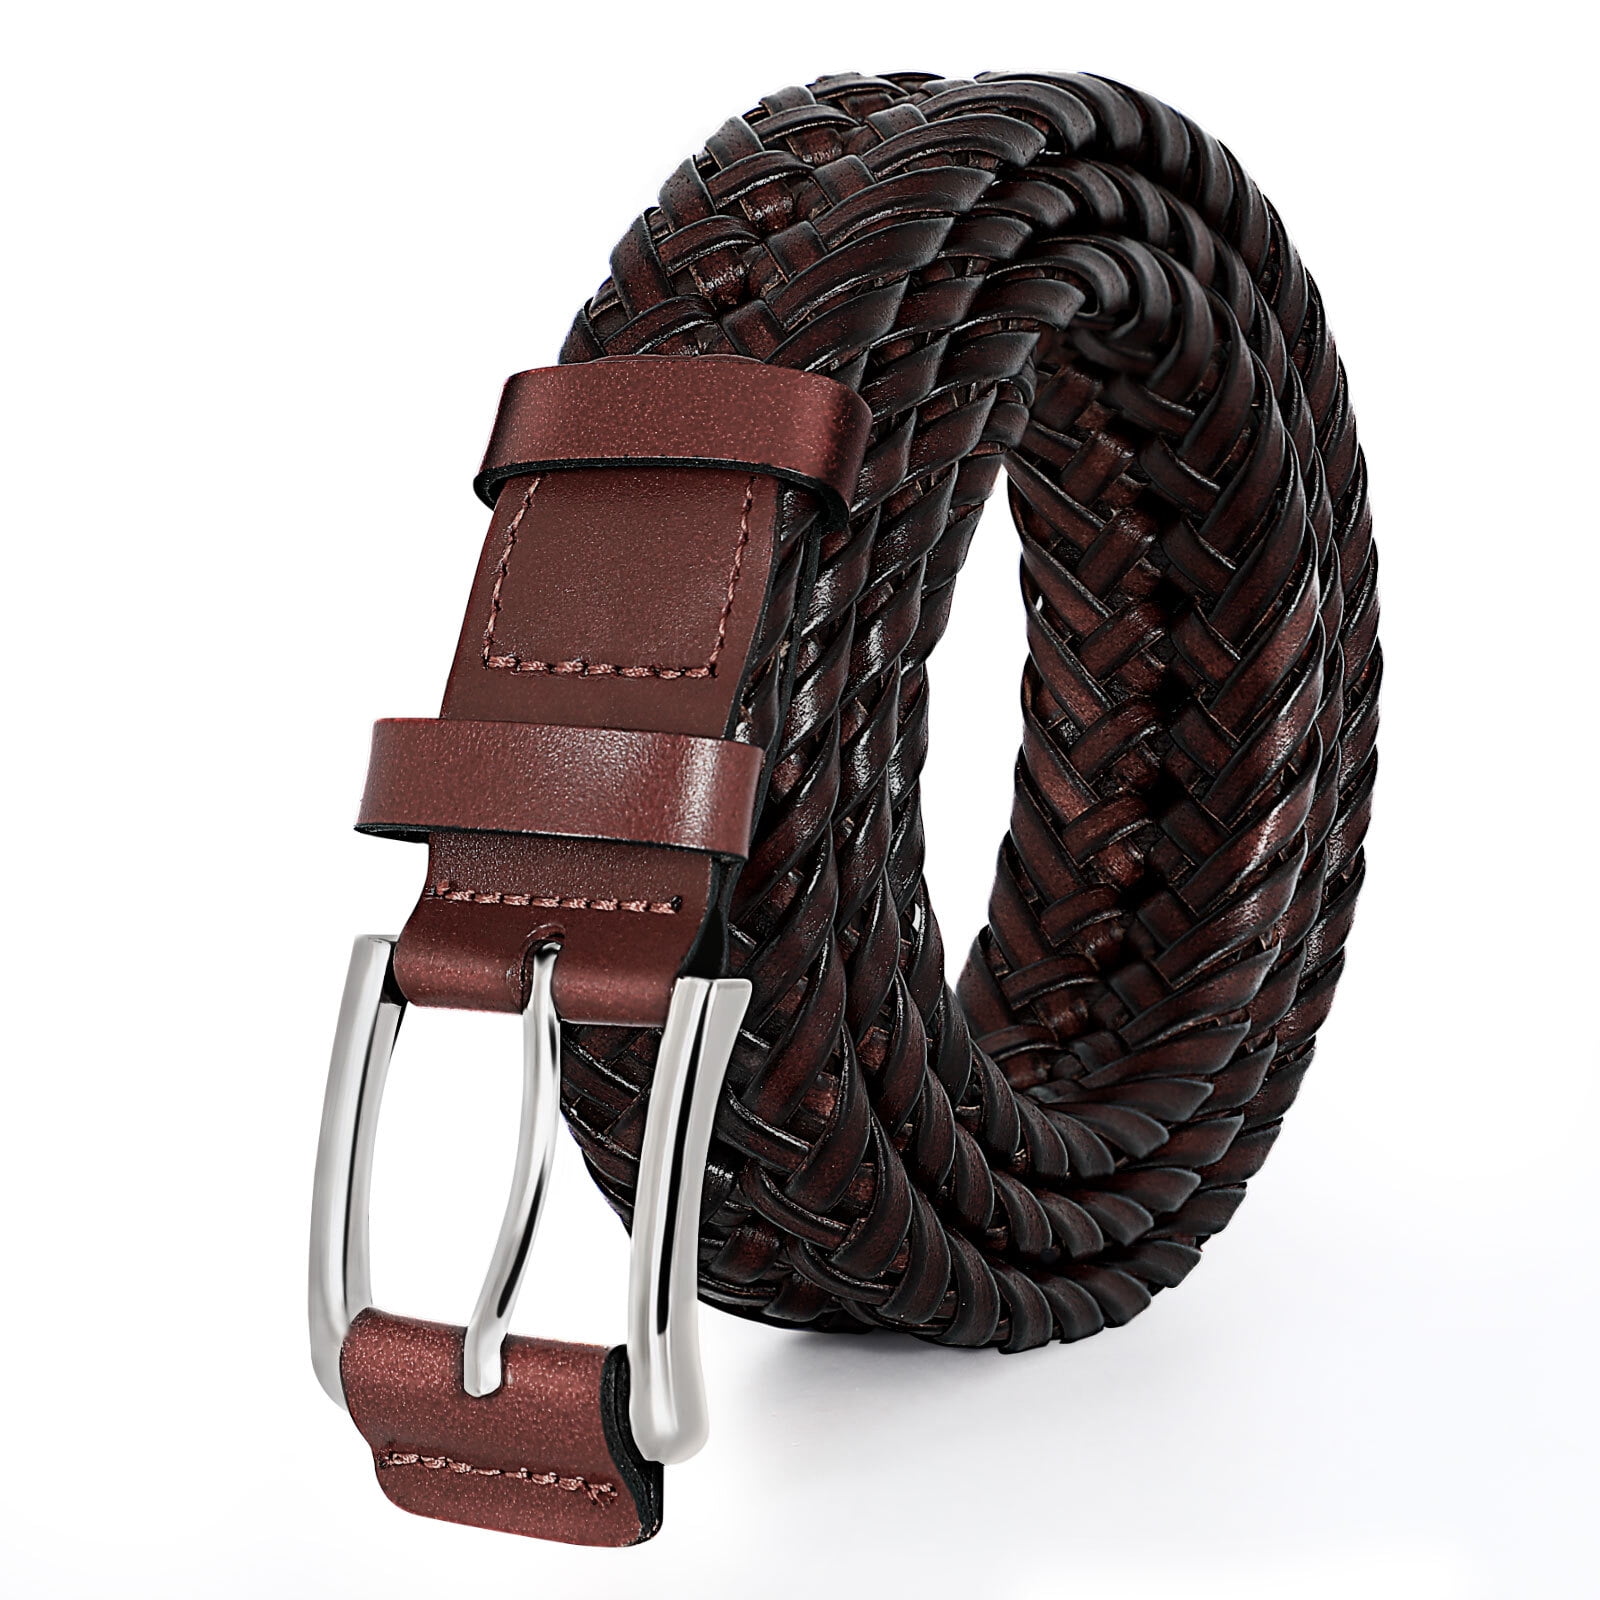 WHIPPY Braided Leather Belts for Men, Mens Woven Belt for Jeans Pants